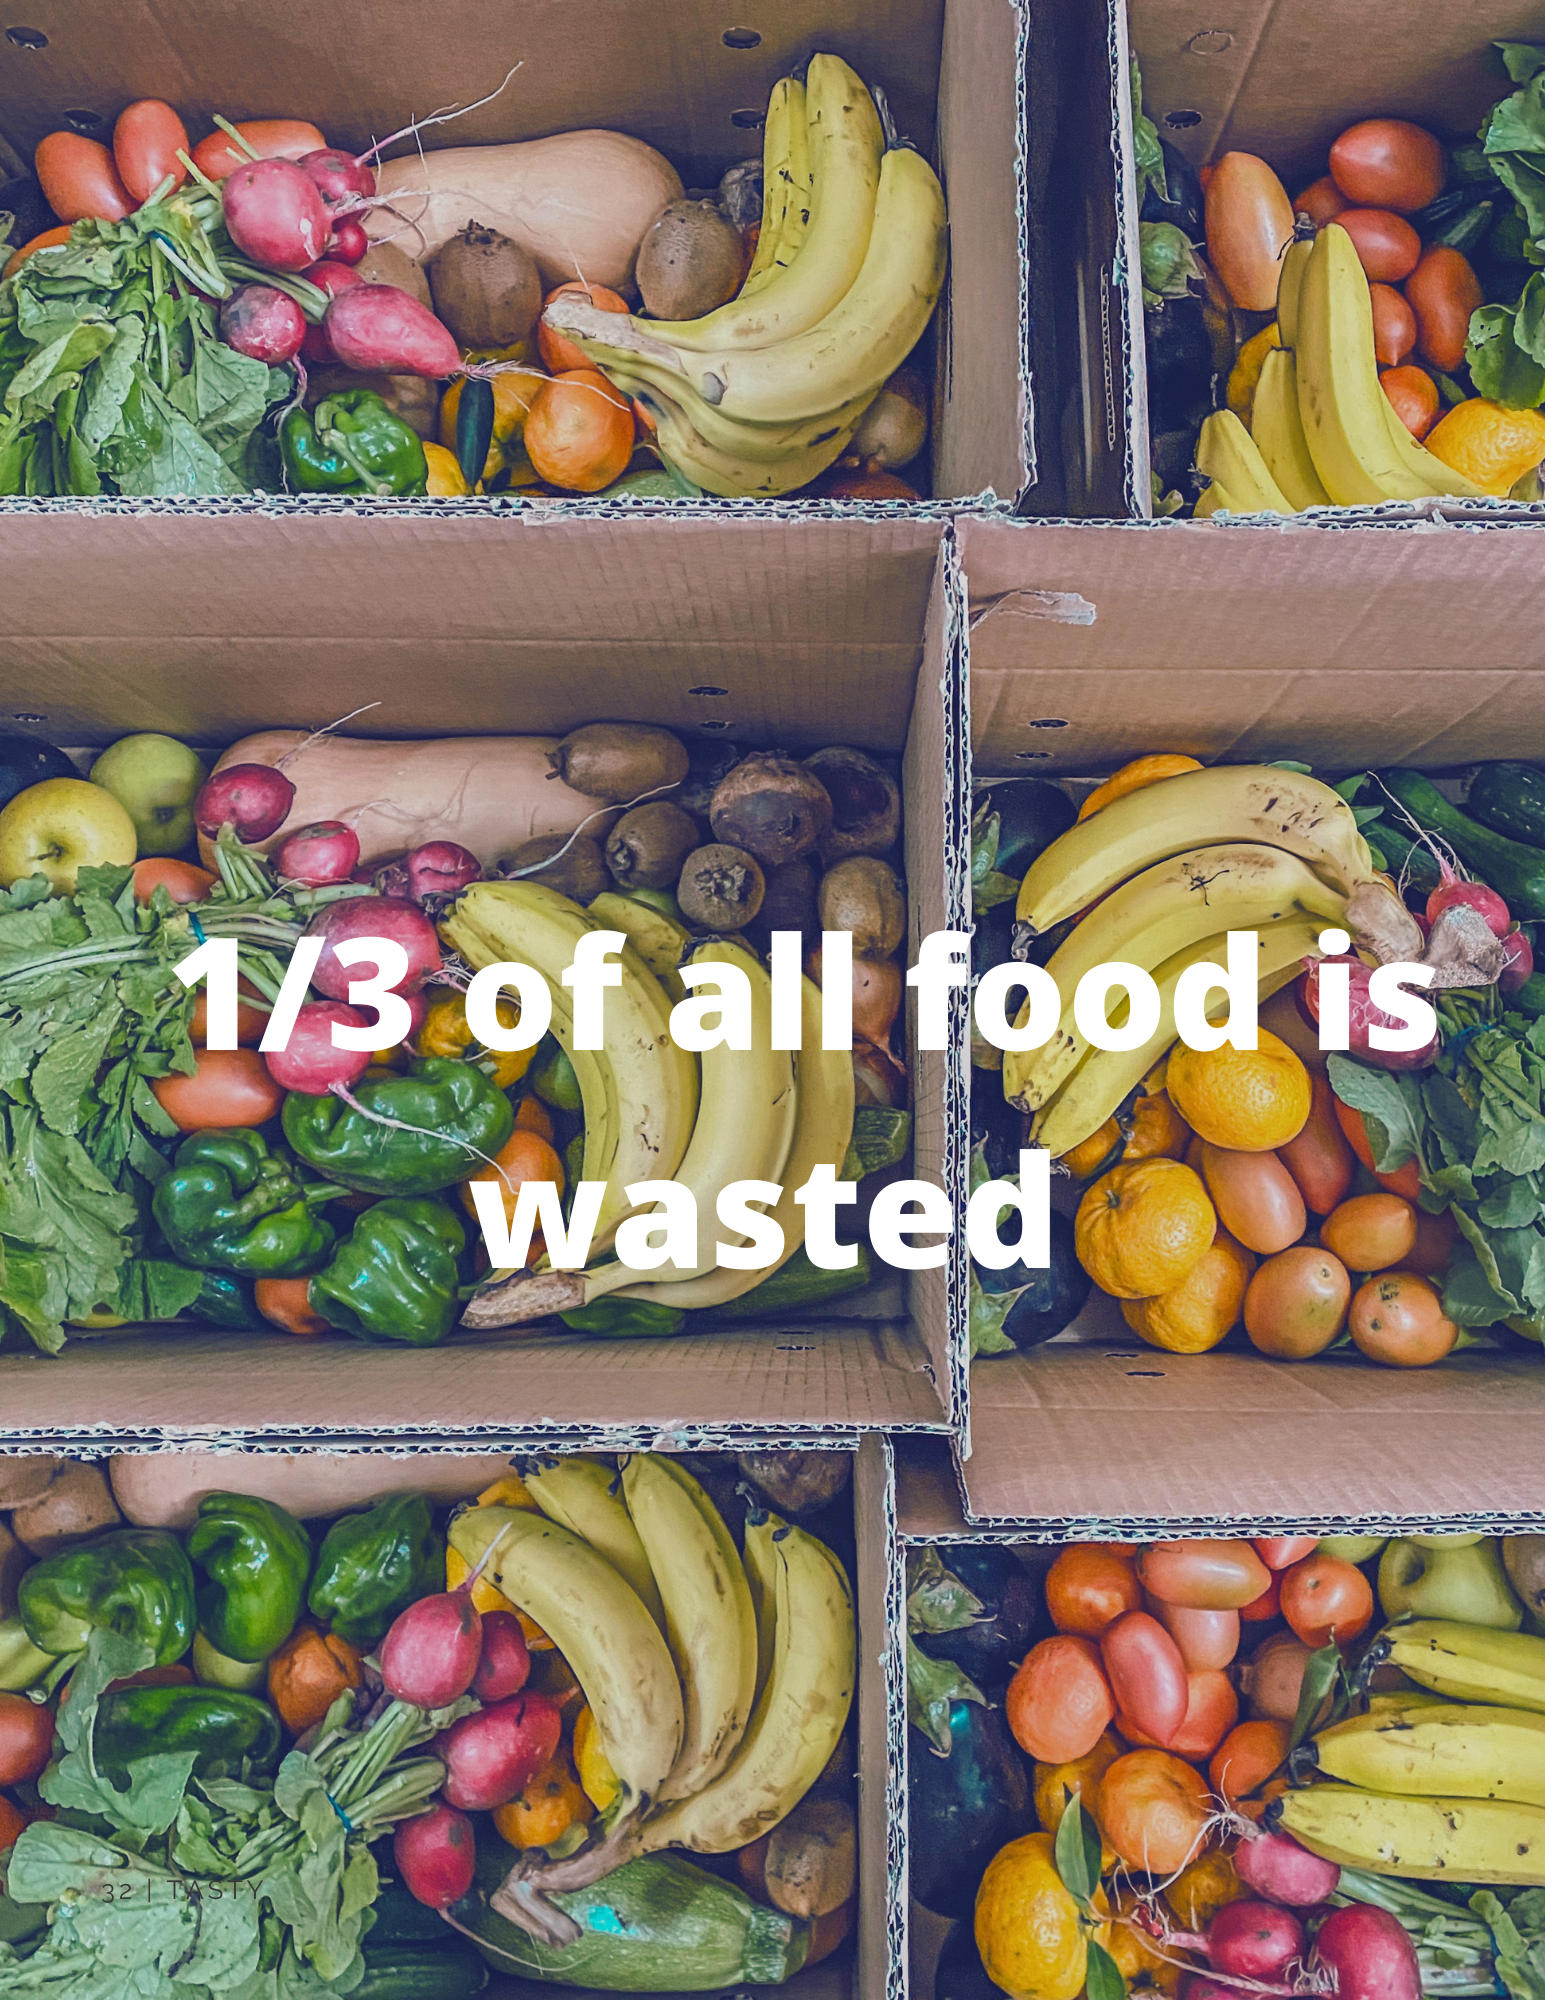 1/3 of food is wasted